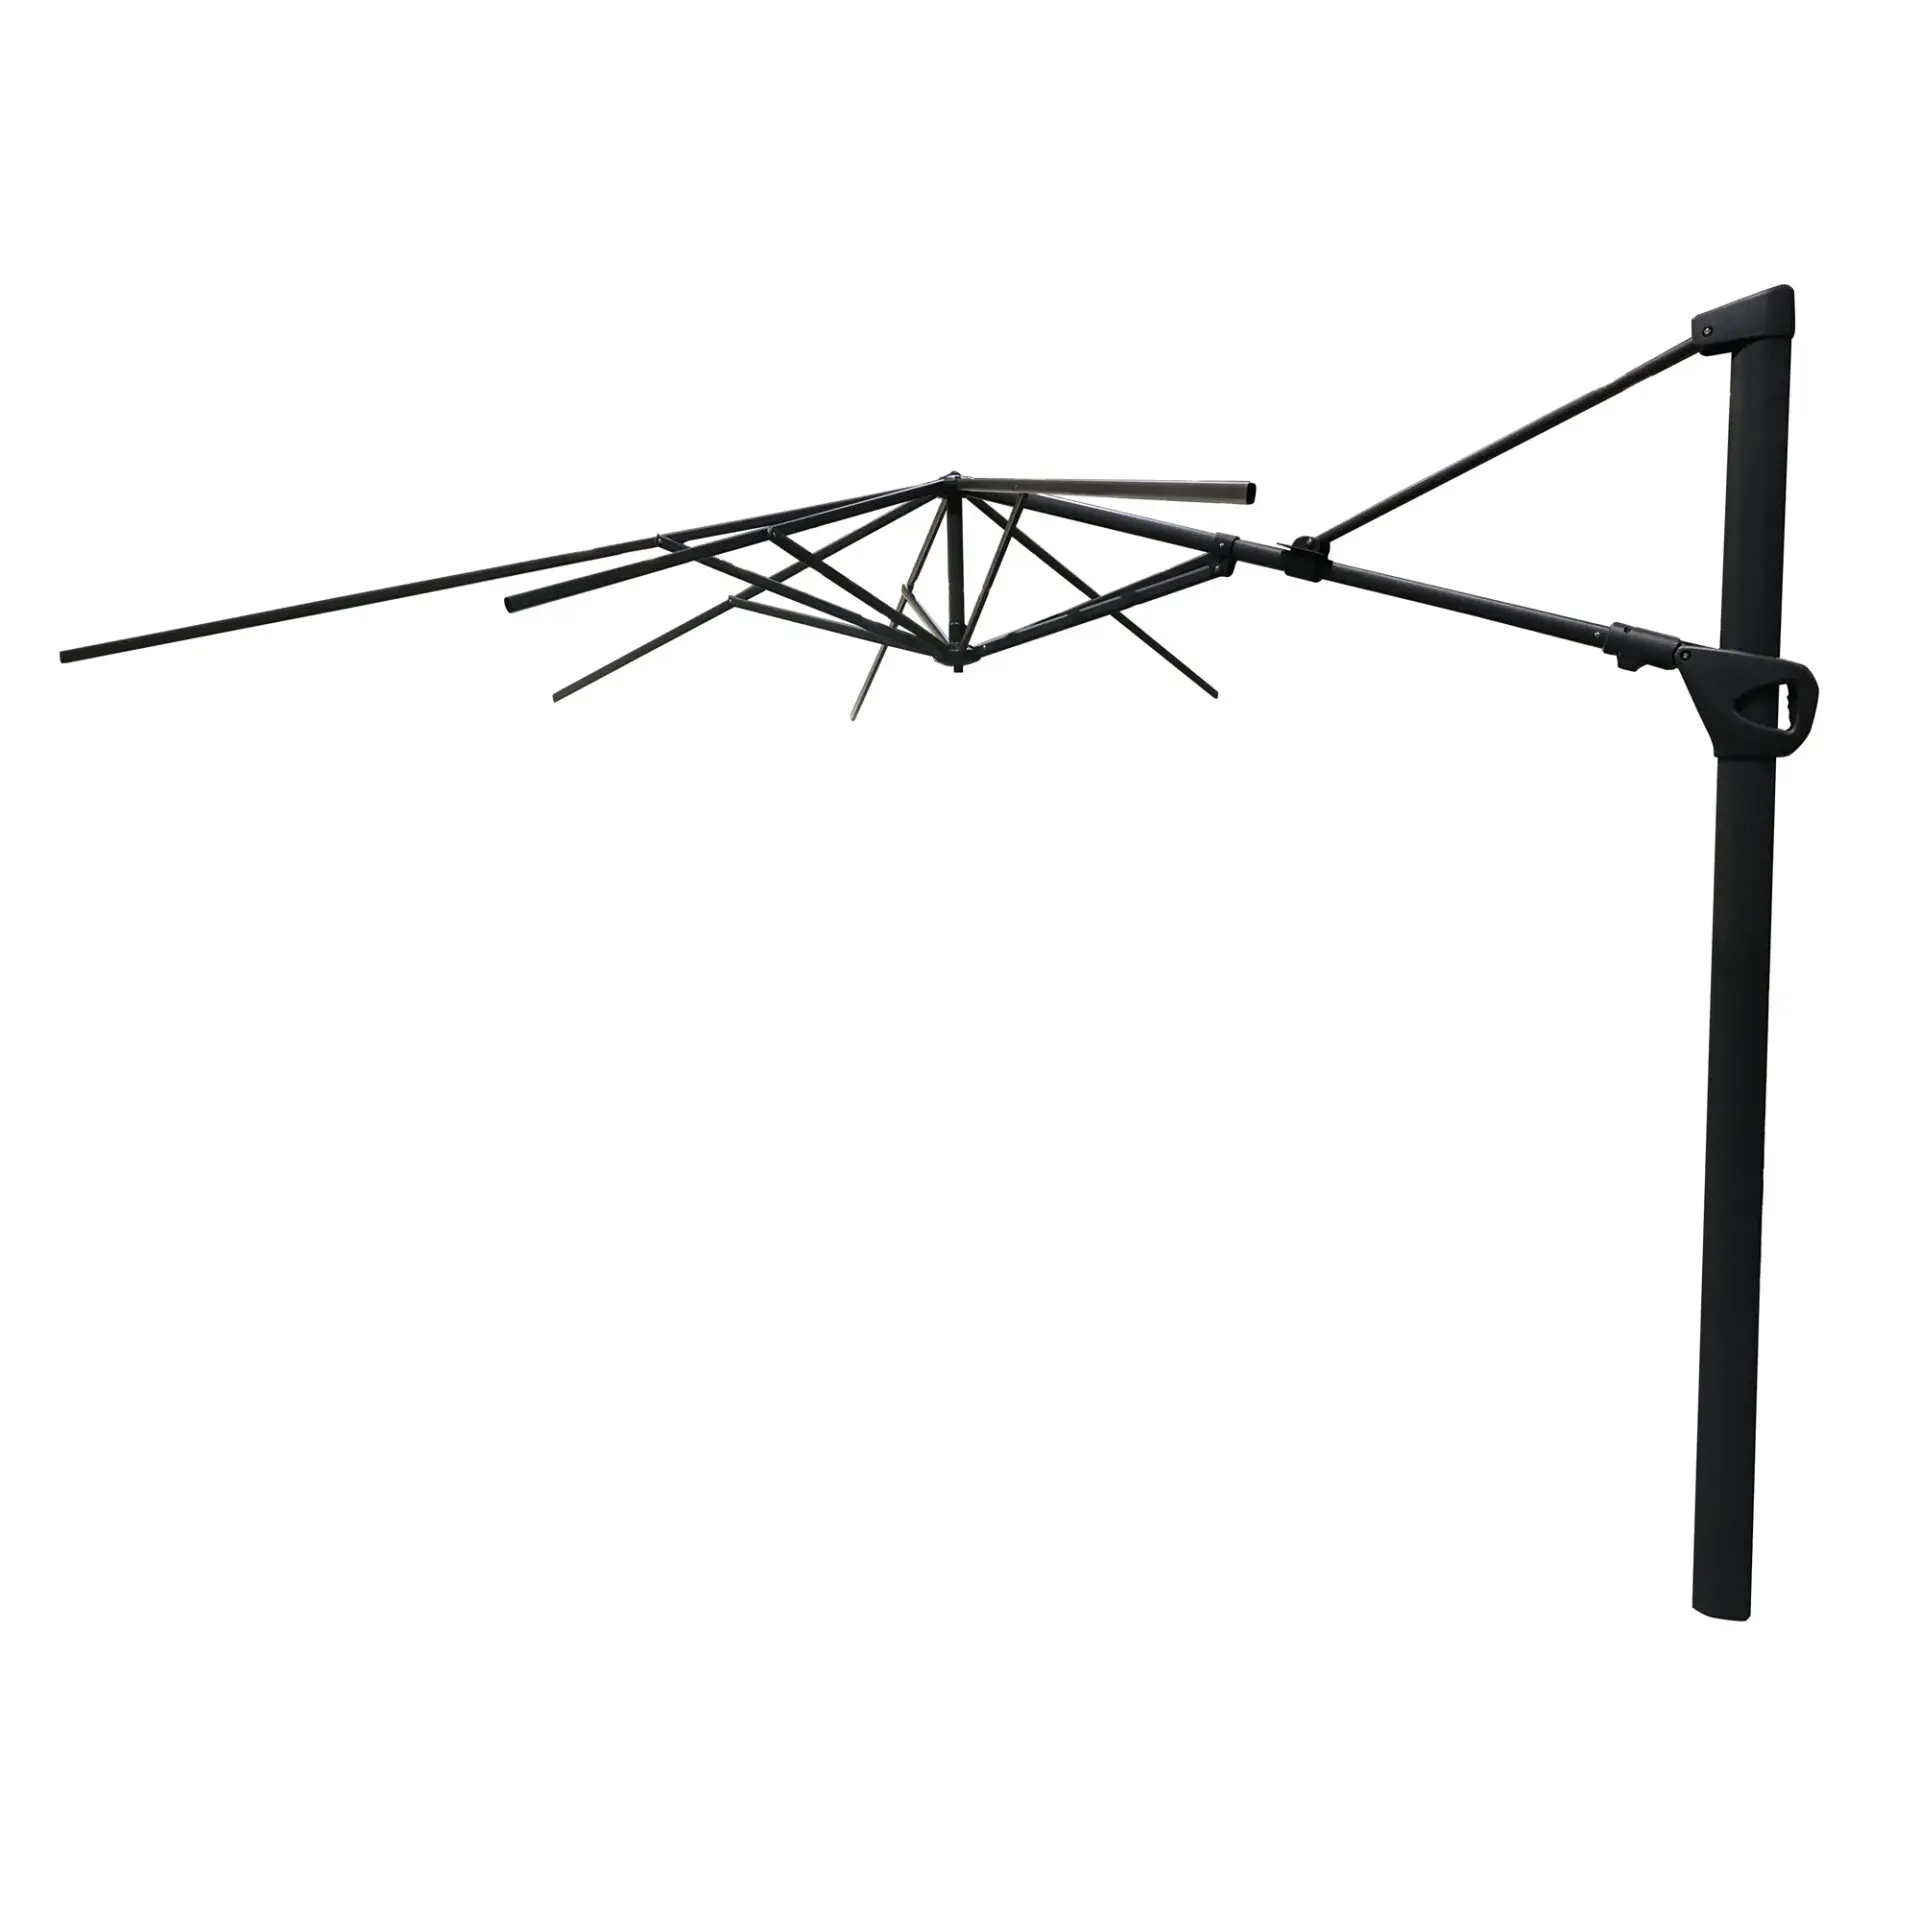 Ten feet Square Cantilever Umbrella Frame without Canopy